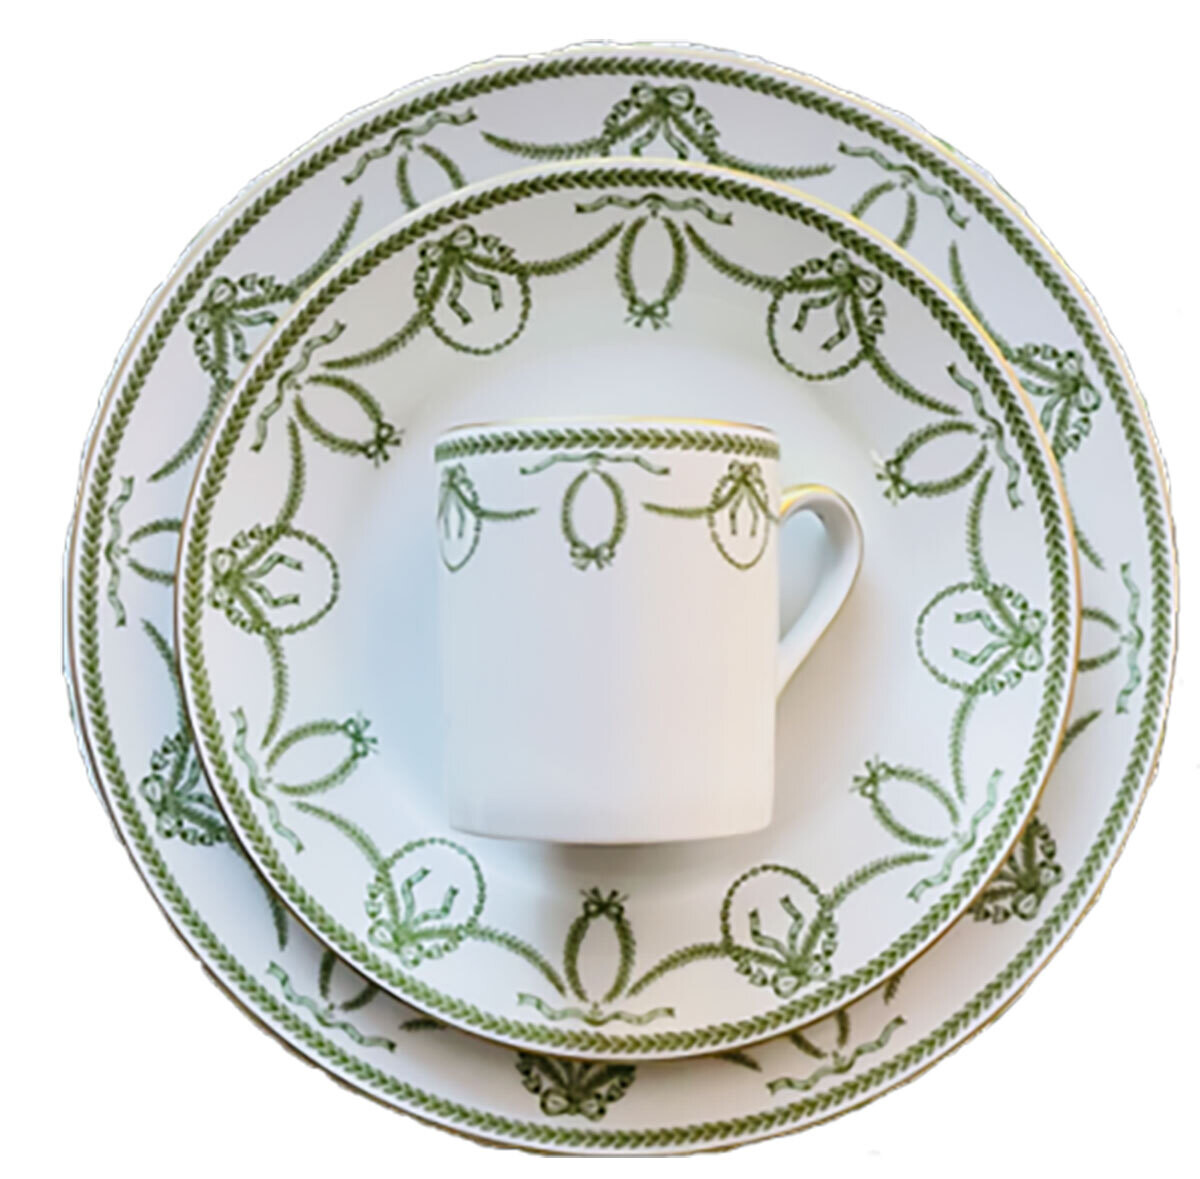 Royal Limoges Cheverny Green Cream Soup Cup 10 oz R500-REC10408